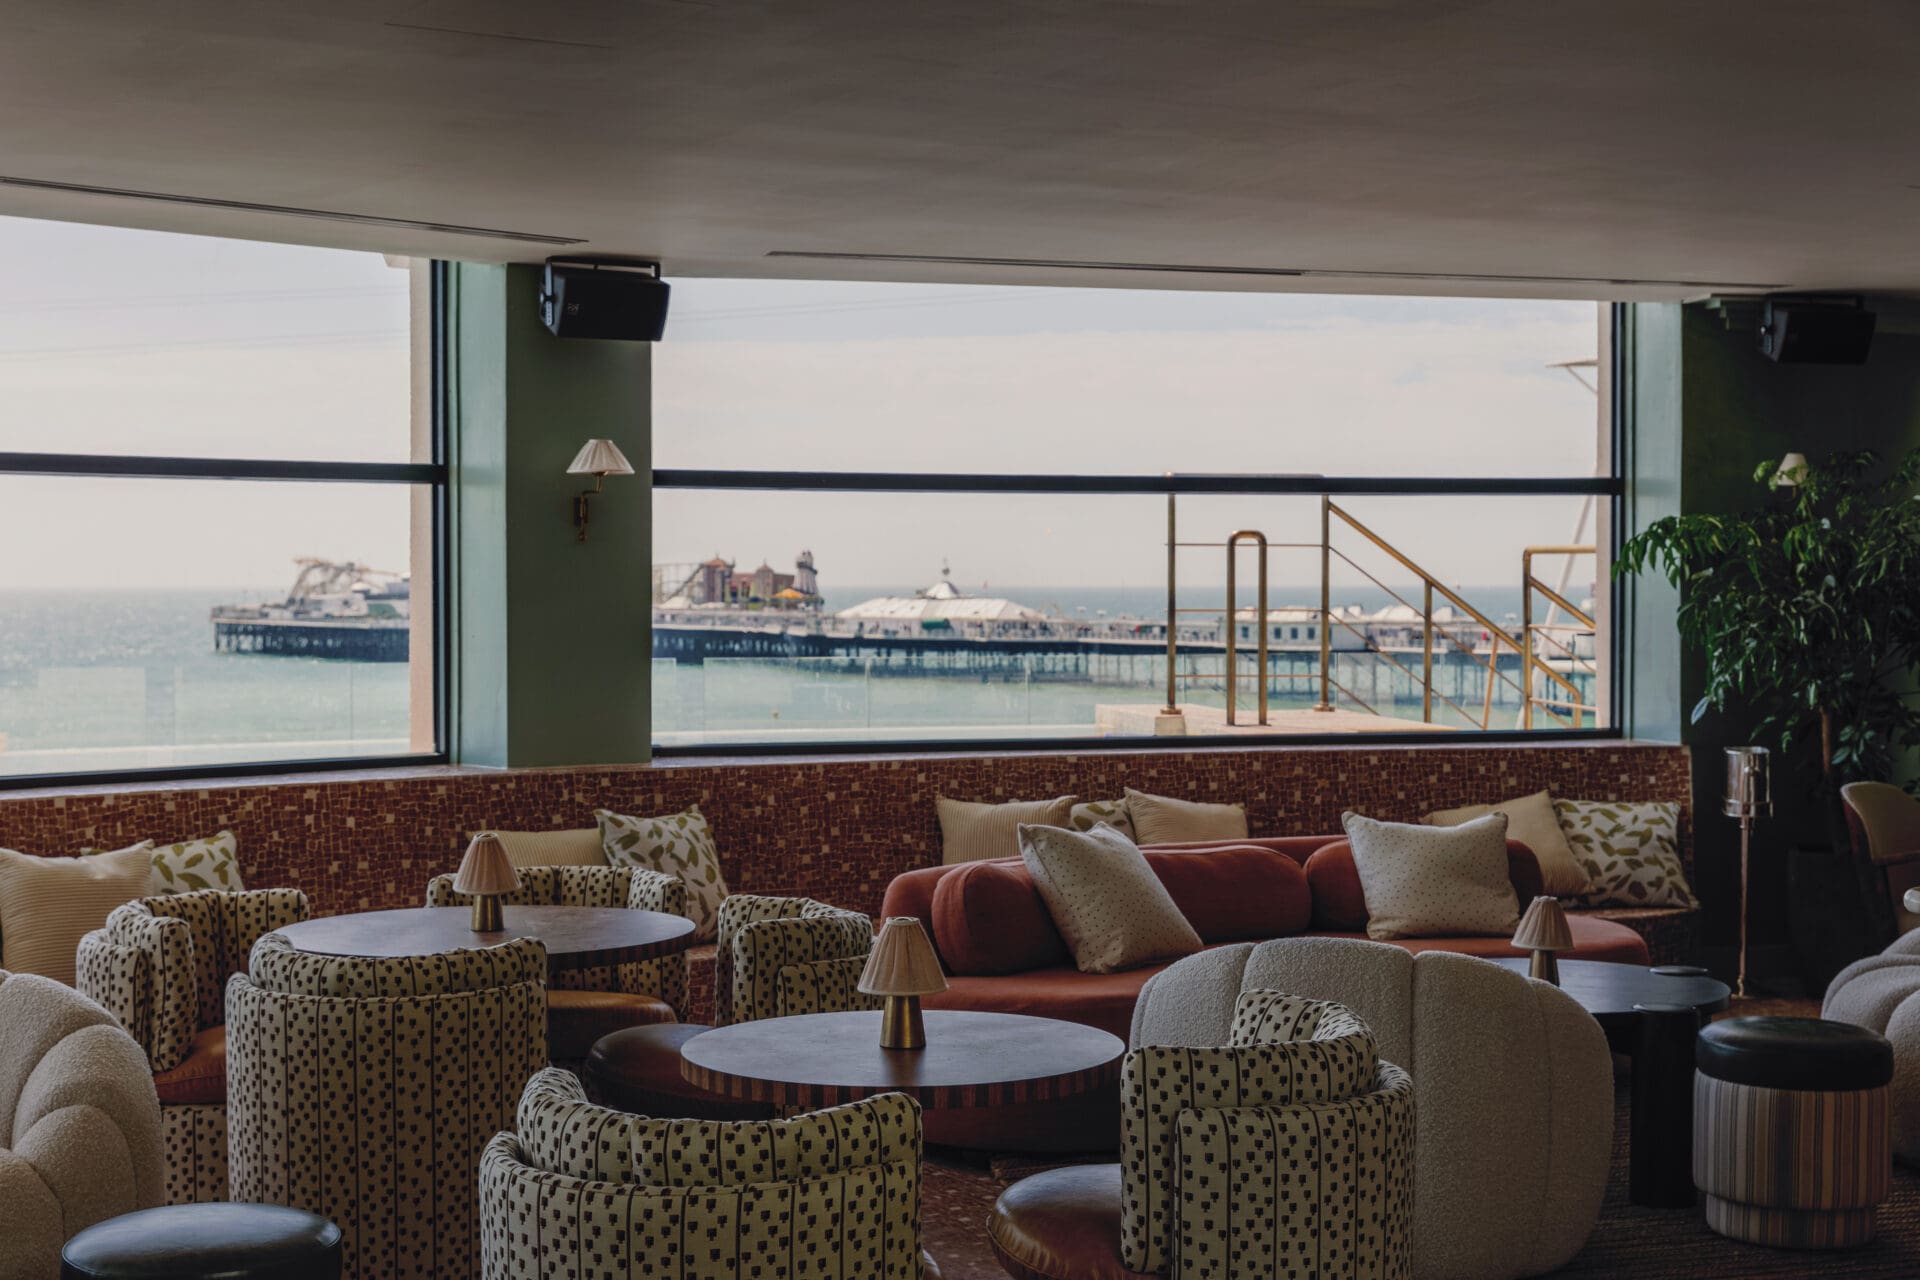 Best bars in Brighton | Brighton Beach House's bar, with 70s interiors in shades of orange and green and a view looking out to the pier